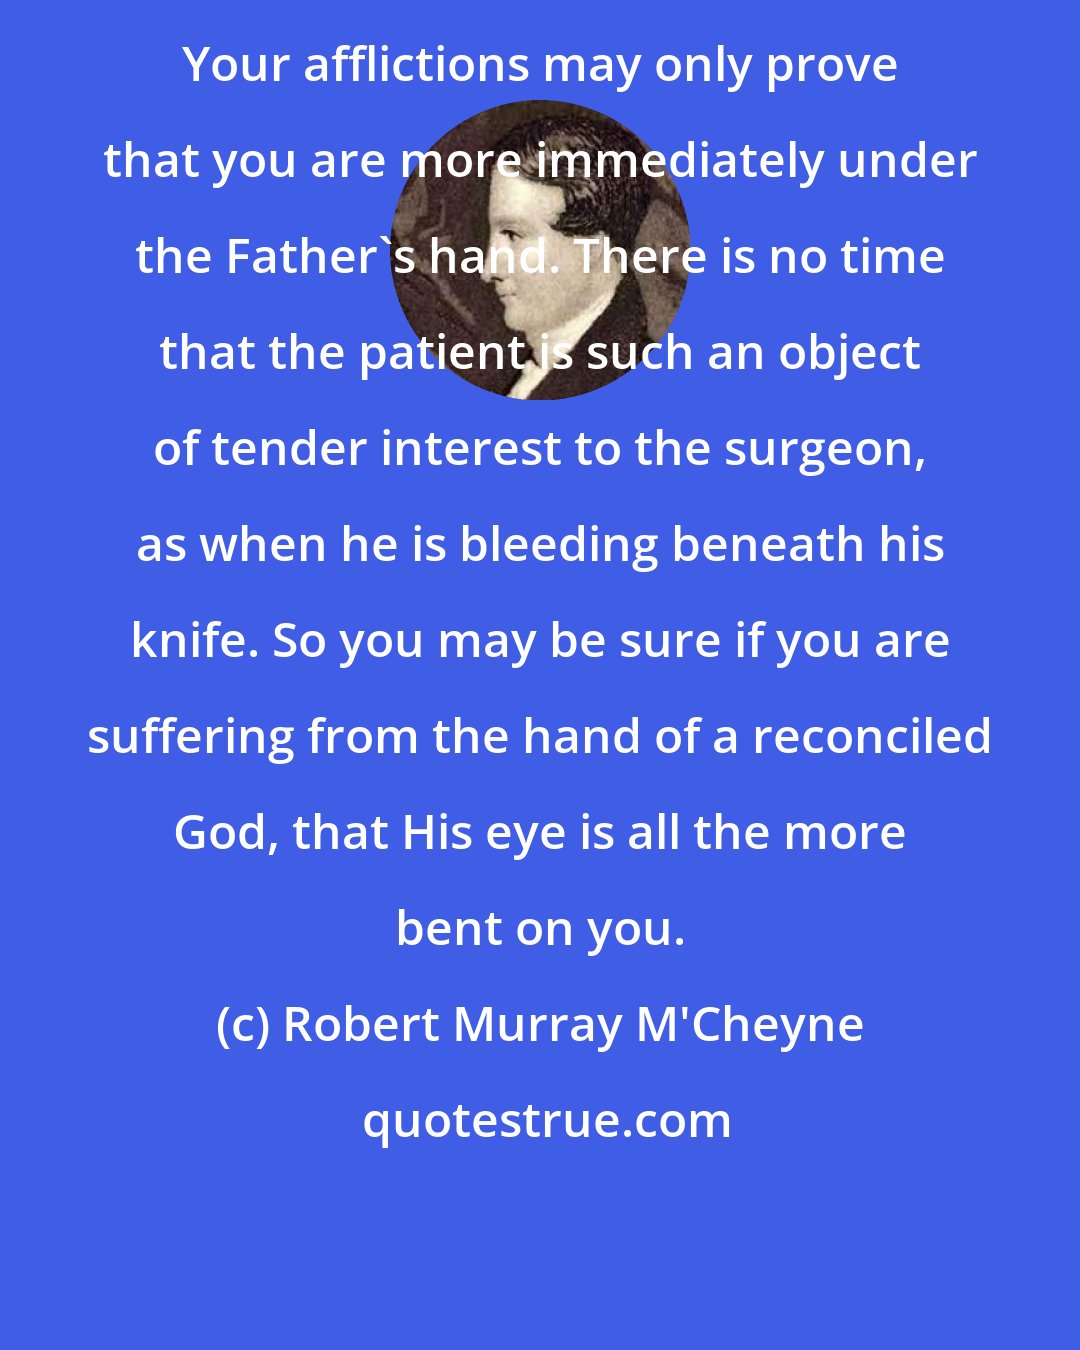 Robert Murray M'Cheyne: Your afflictions may only prove that you are more immediately under the Father's hand. There is no time that the patient is such an object of tender interest to the surgeon, as when he is bleeding beneath his knife. So you may be sure if you are suffering from the hand of a reconciled God, that His eye is all the more bent on you.